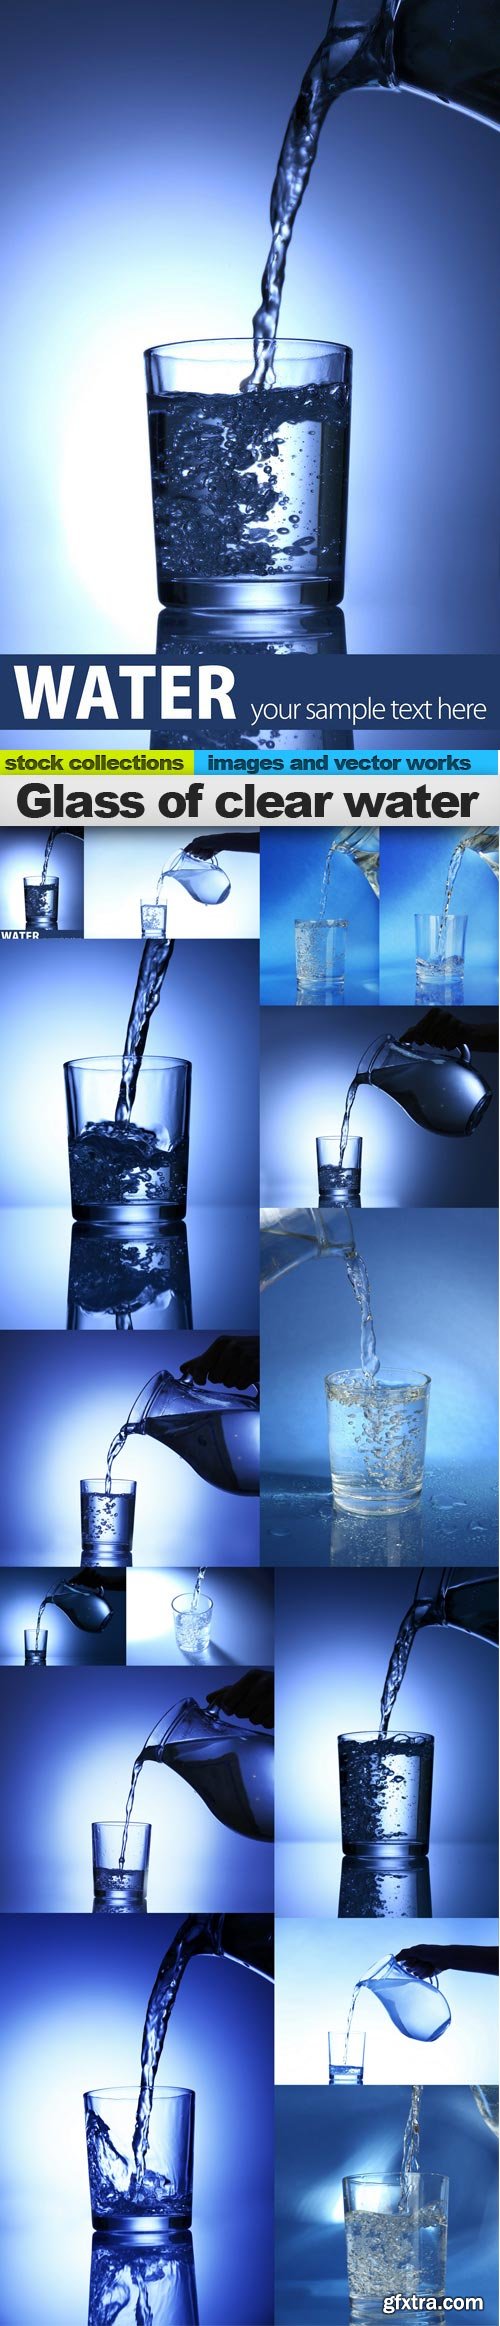 Glass of clear water, 15 x UHQ JPEG